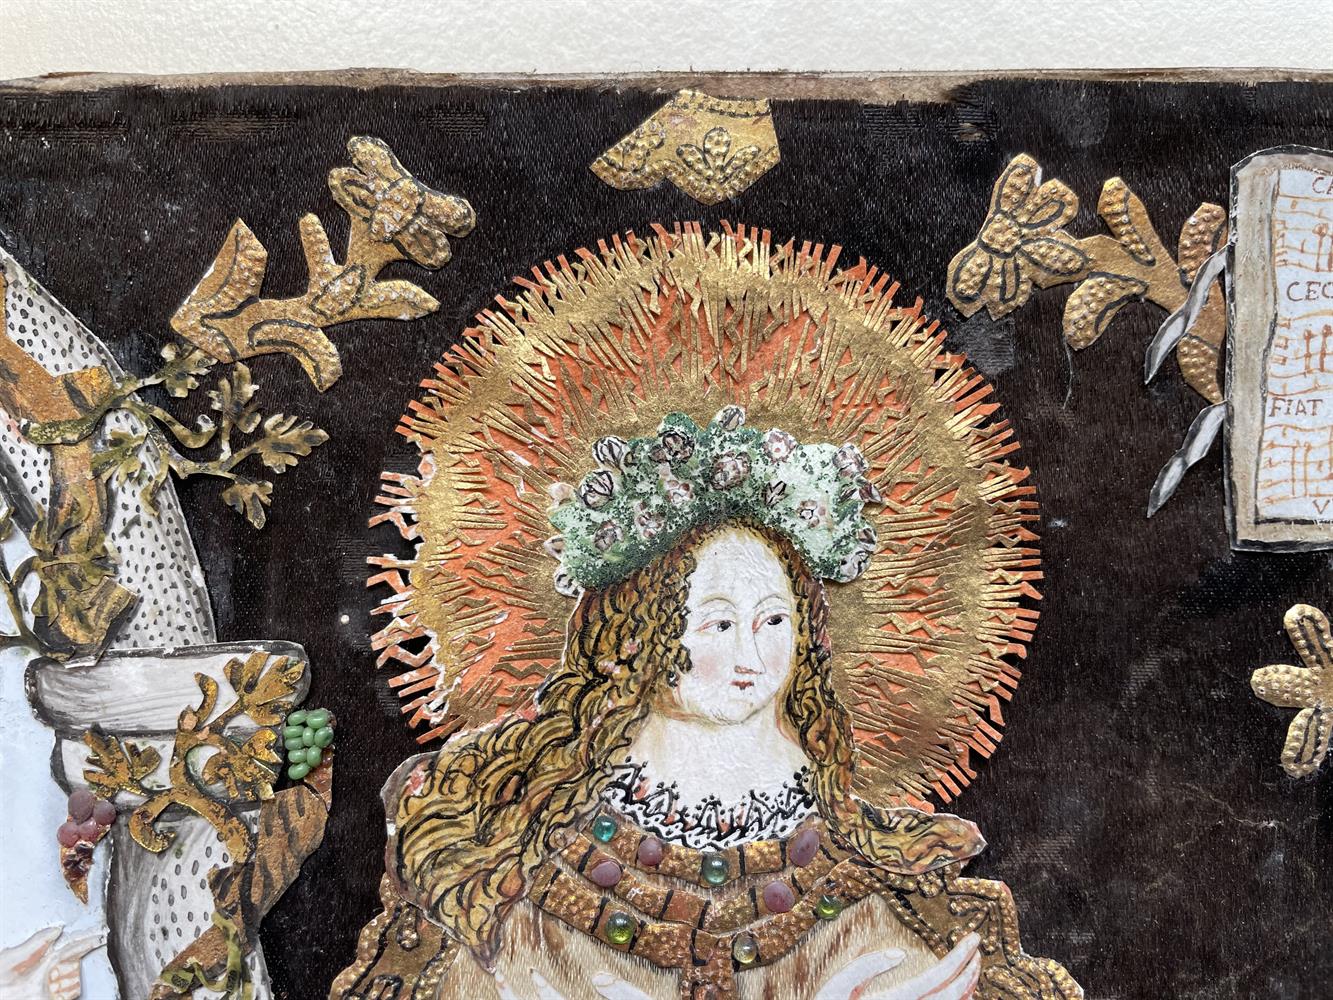 A RARE TEXTILE AND NEEDLEWORK COLLAGE PICTURE DEPICTING SAINT CECILIA, LATE 16TH/EARLY 17TH CENTURY - Image 10 of 18